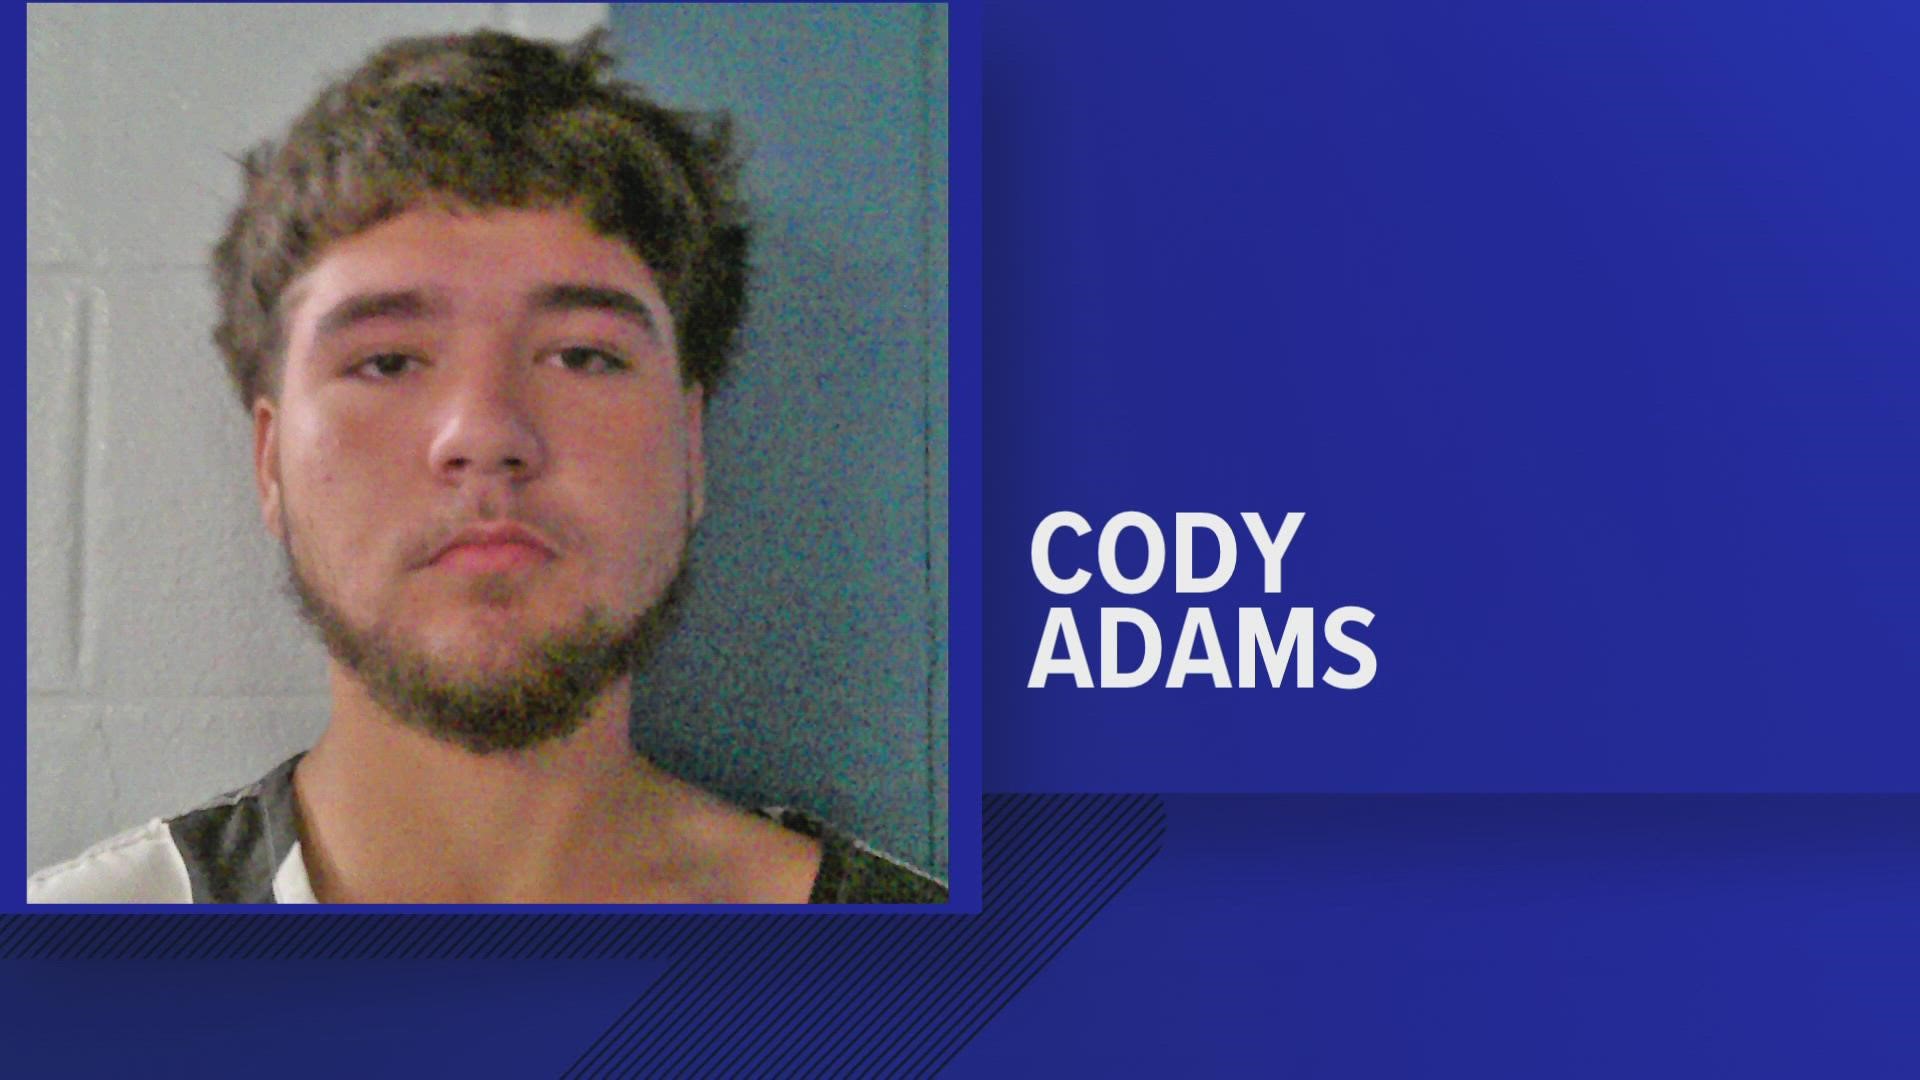 21-year-old Cody Adams is wanted for principal to second degree murder.